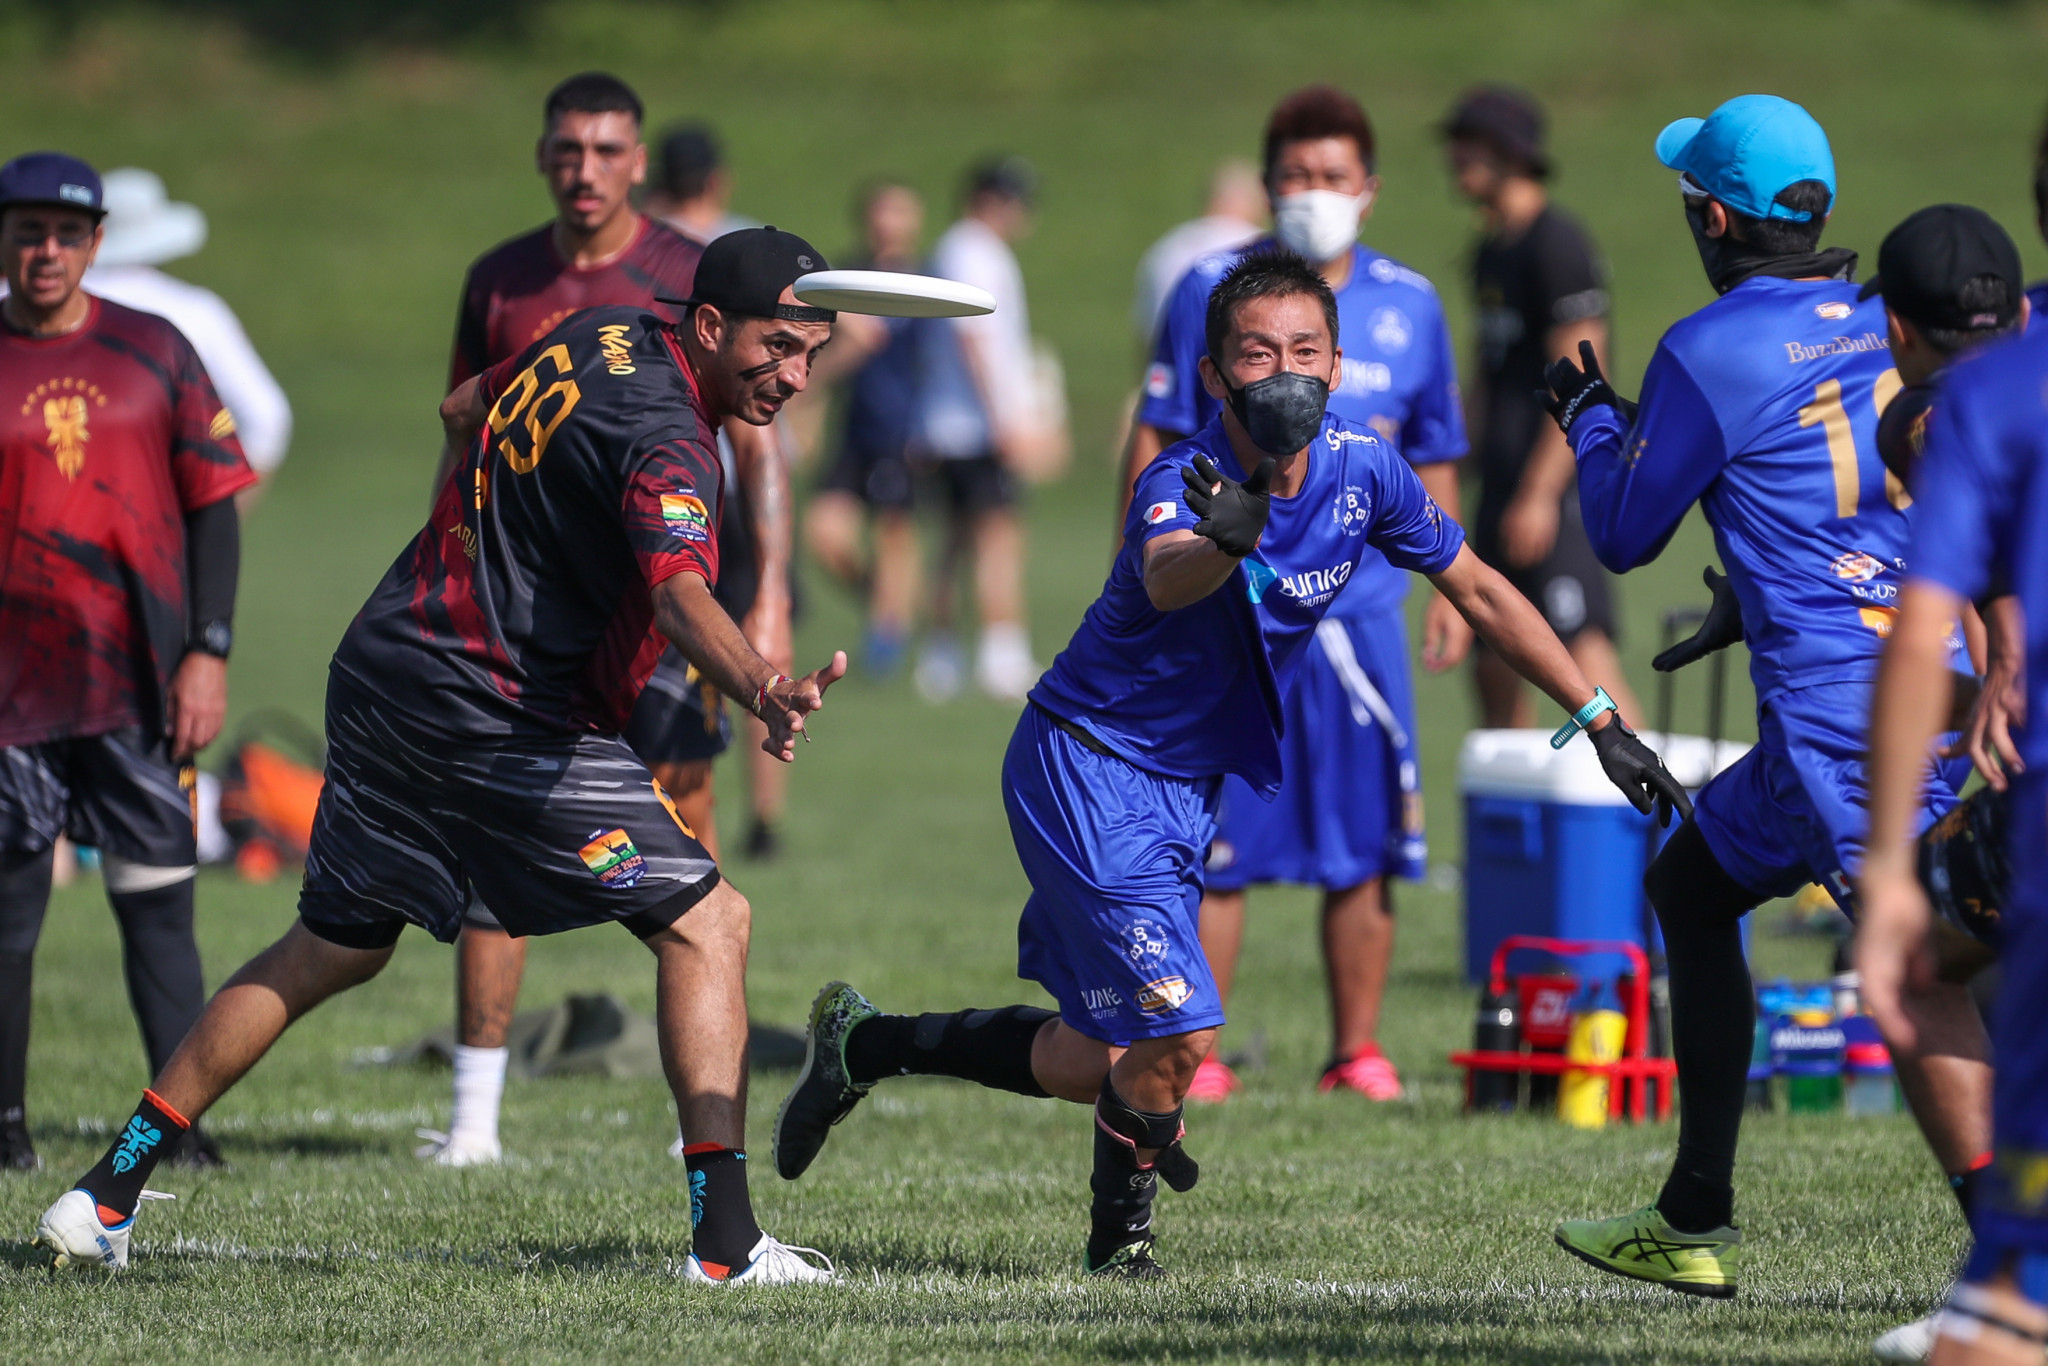 Buzz Bullets off to flying start at World Ultimate Club Championships